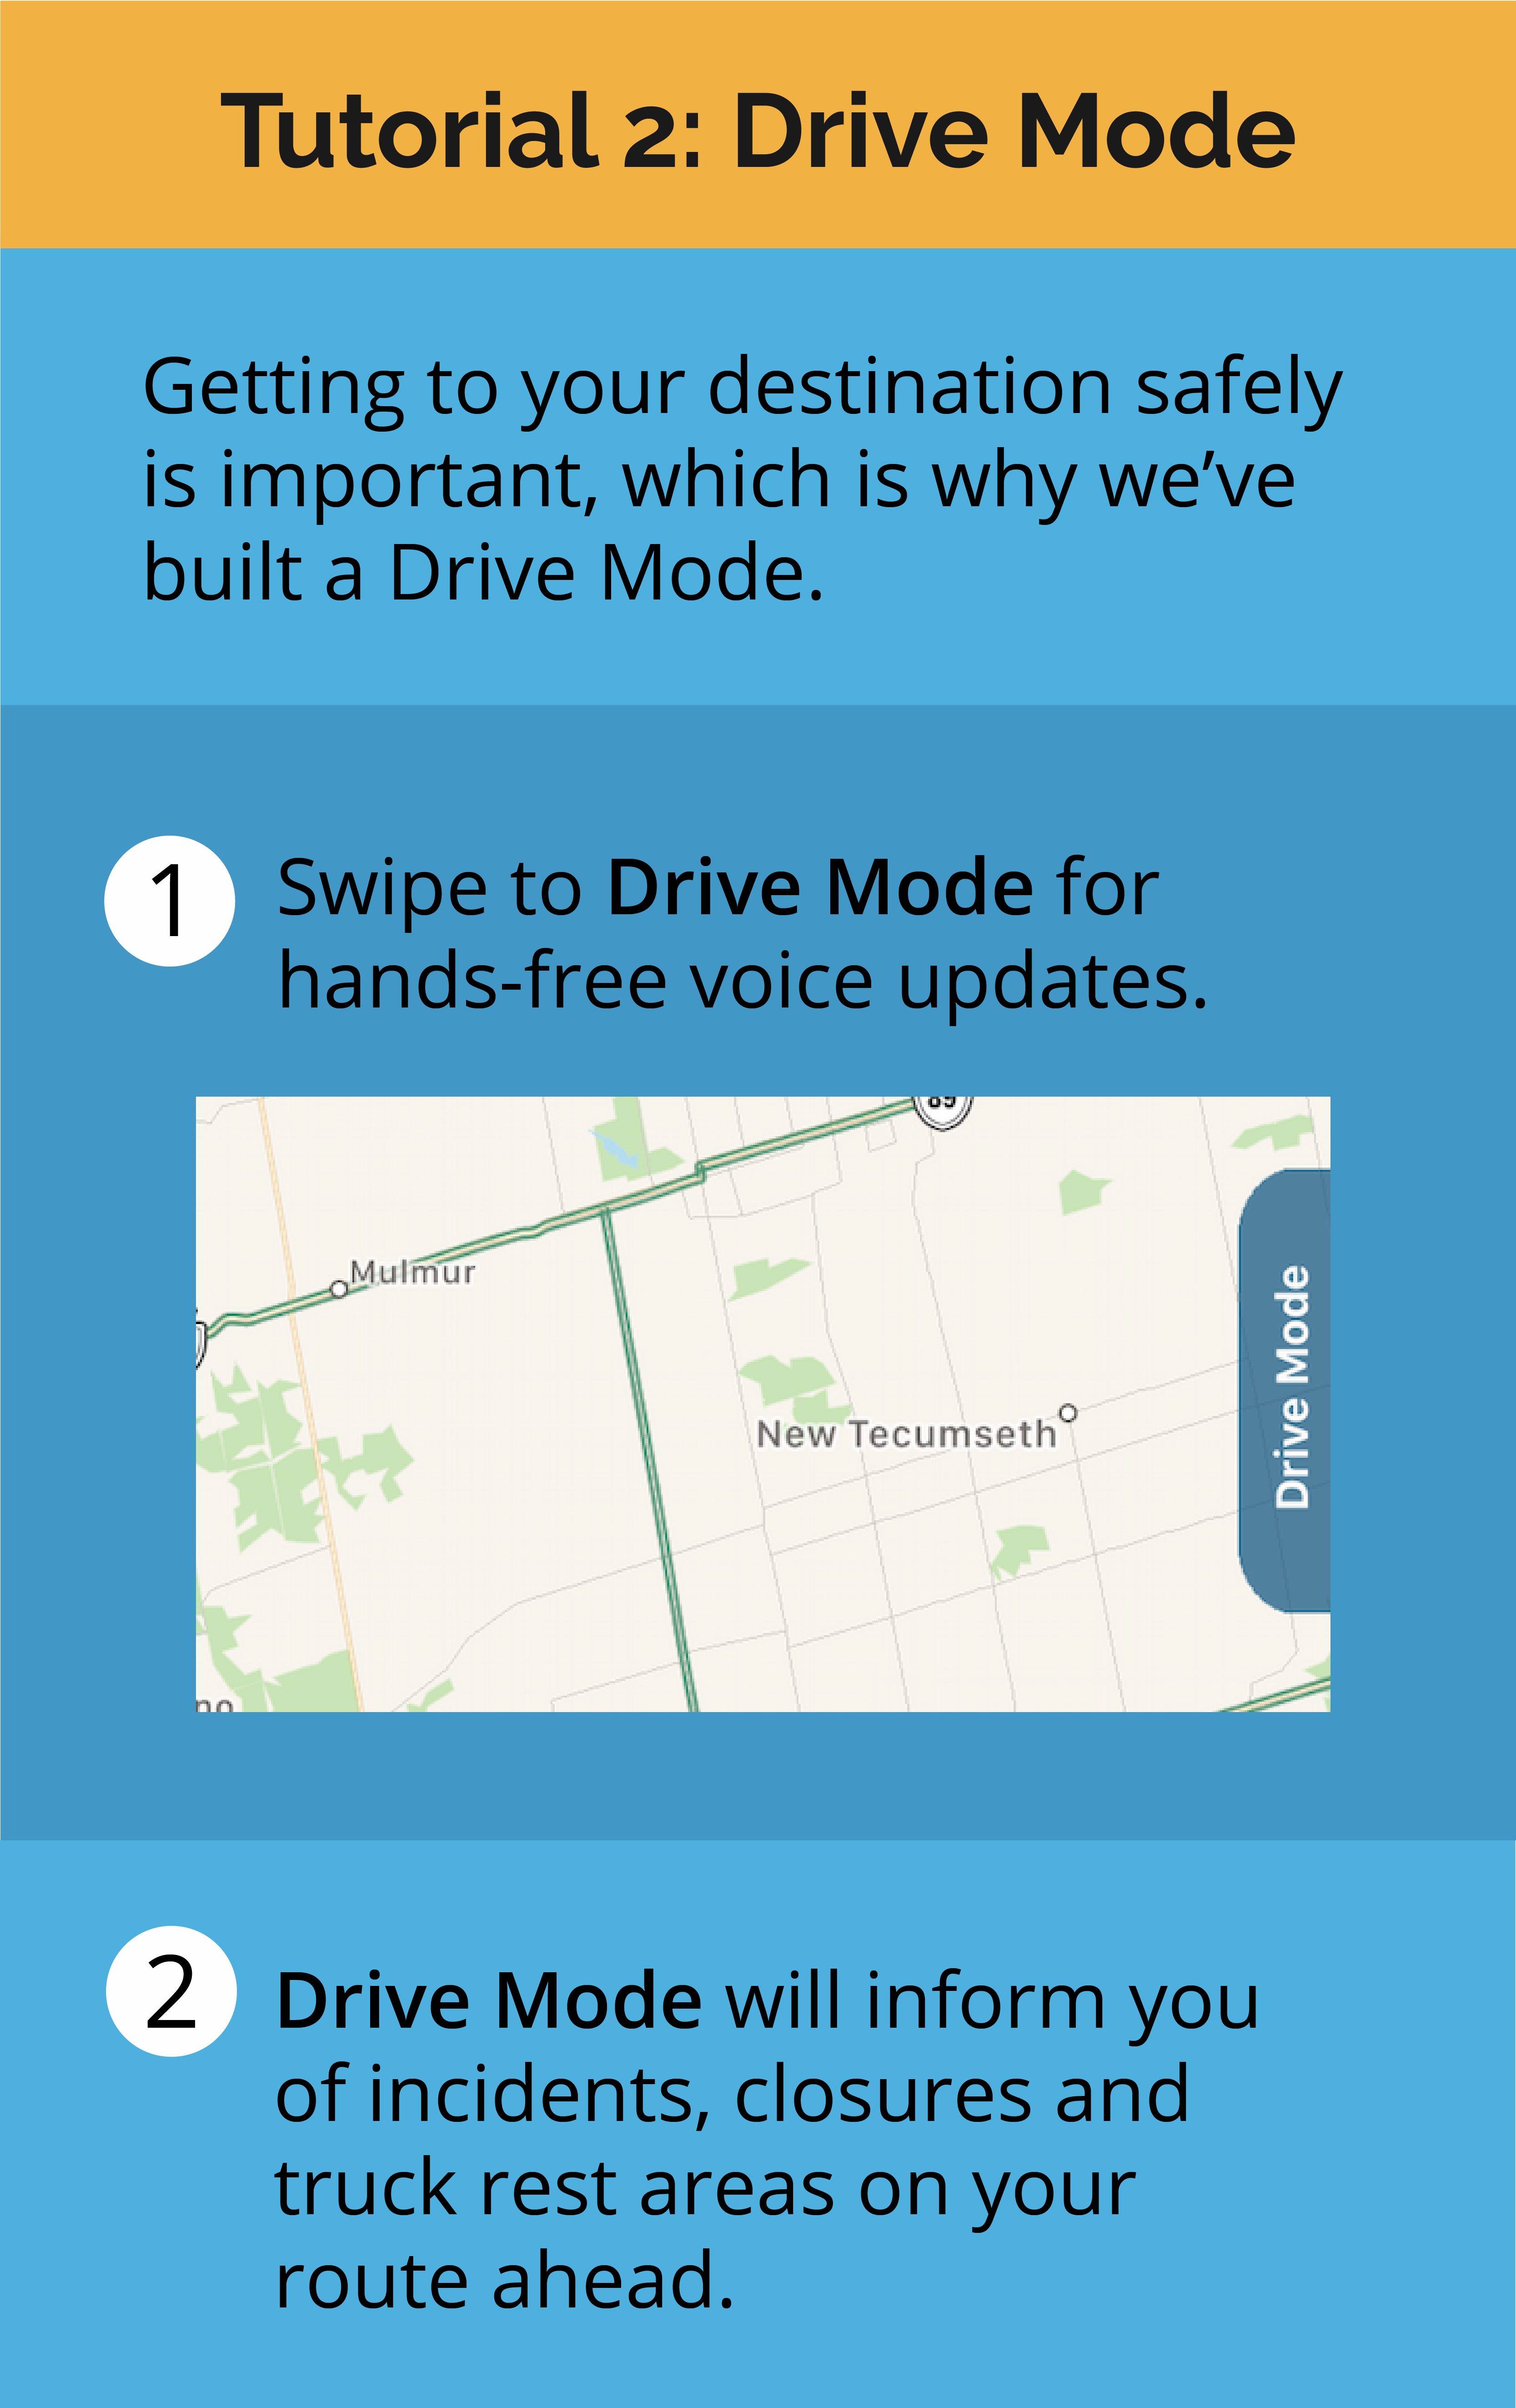 Tutorial 2: Drive Mode  Getting to your destination safely is important, which is why we’ve built a Drive Mode.  1.	Swipe to Drive Mode for hands-free voice updates. 2.	Drive Mode will inform you of incidents, closures, and truck rest areas on your route ahead.